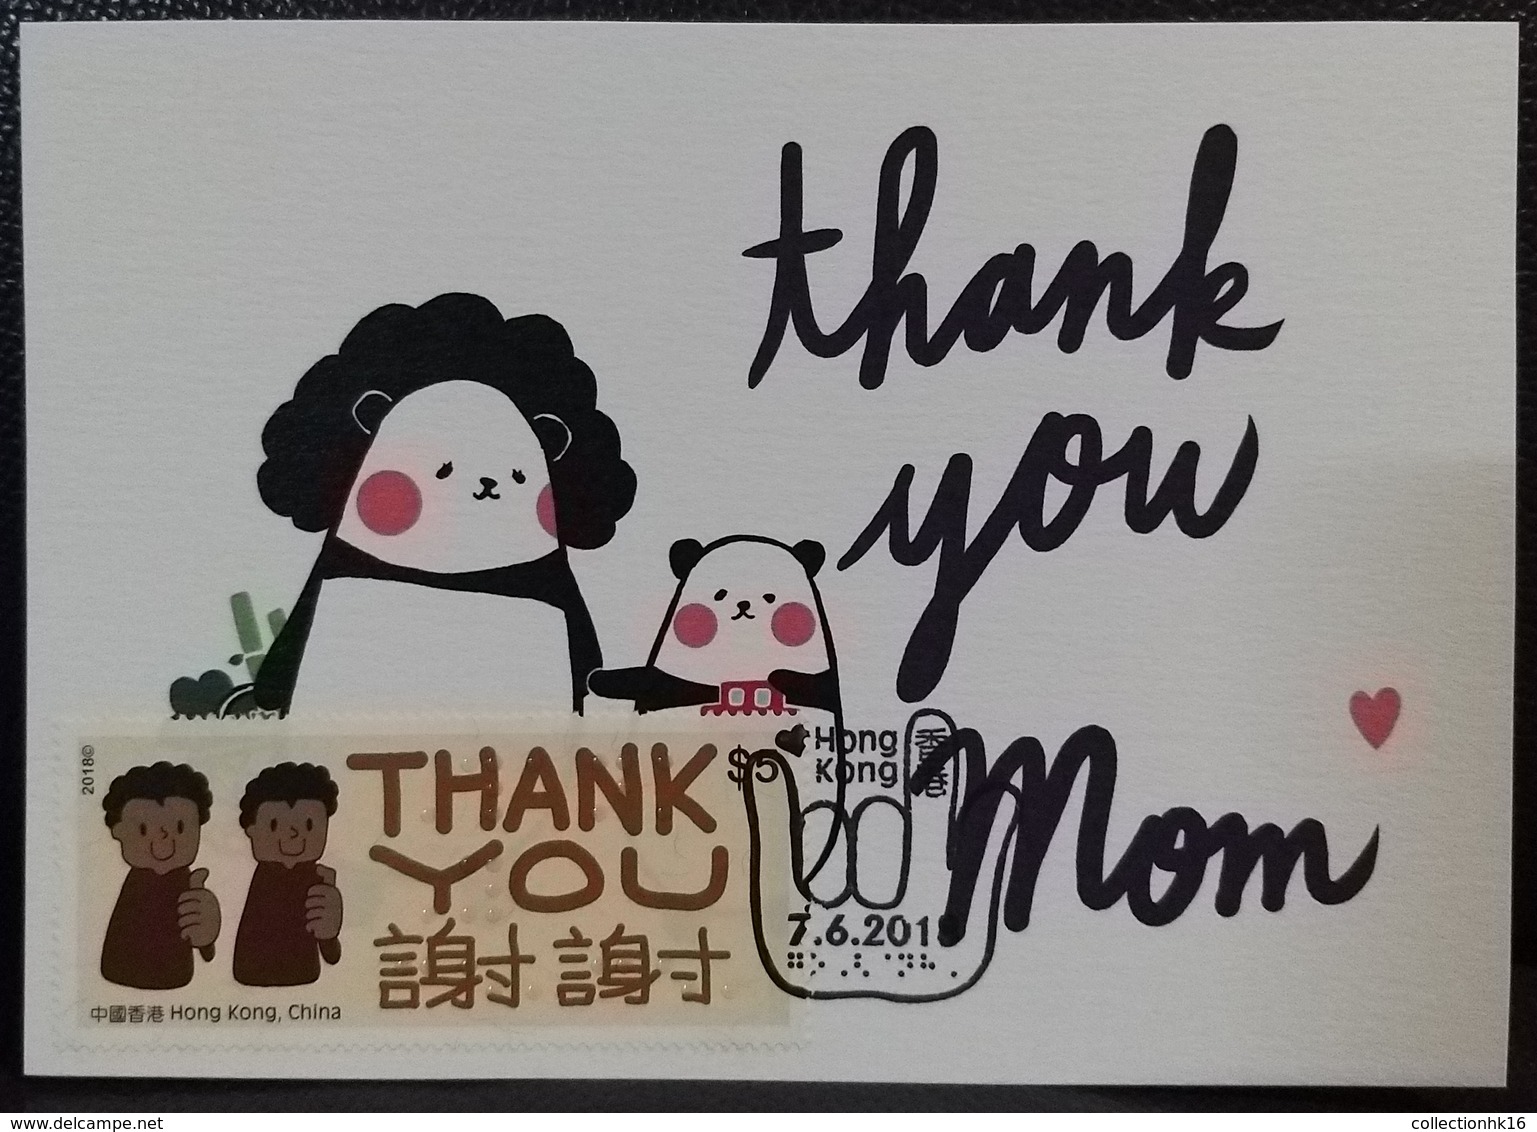 Sign Language Braille Stamps Inclusive Communication Hands 2018 Hong Kong Maximum Card THANK YOU Mom Mother Type G - Maximumkarten